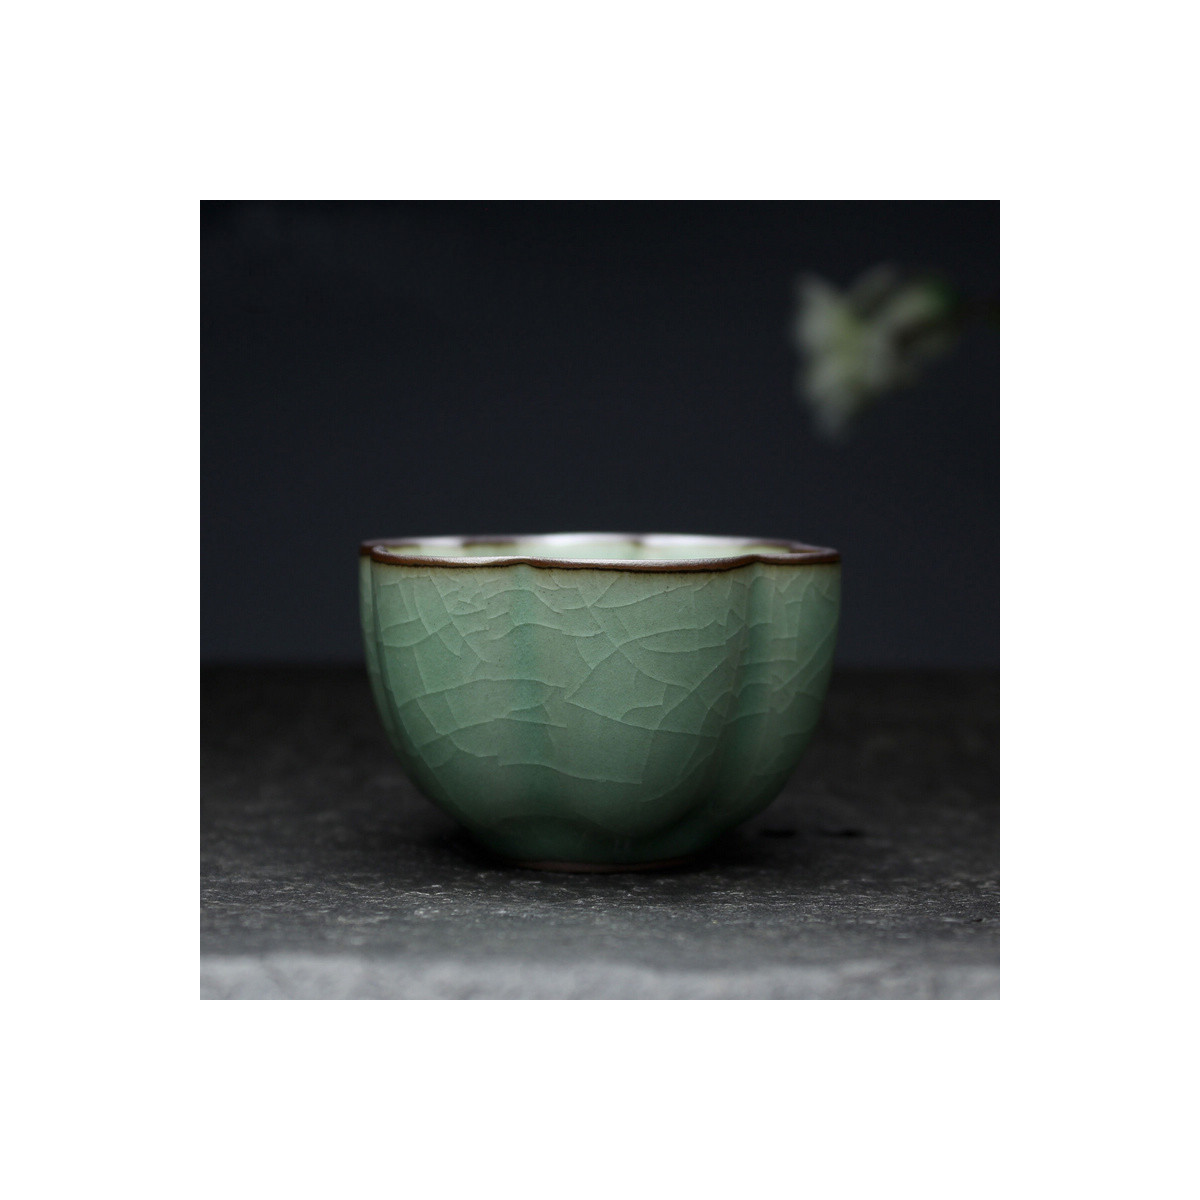 Chinese Gong Fu Cha Tea Cup "Calyx", Crackled Green